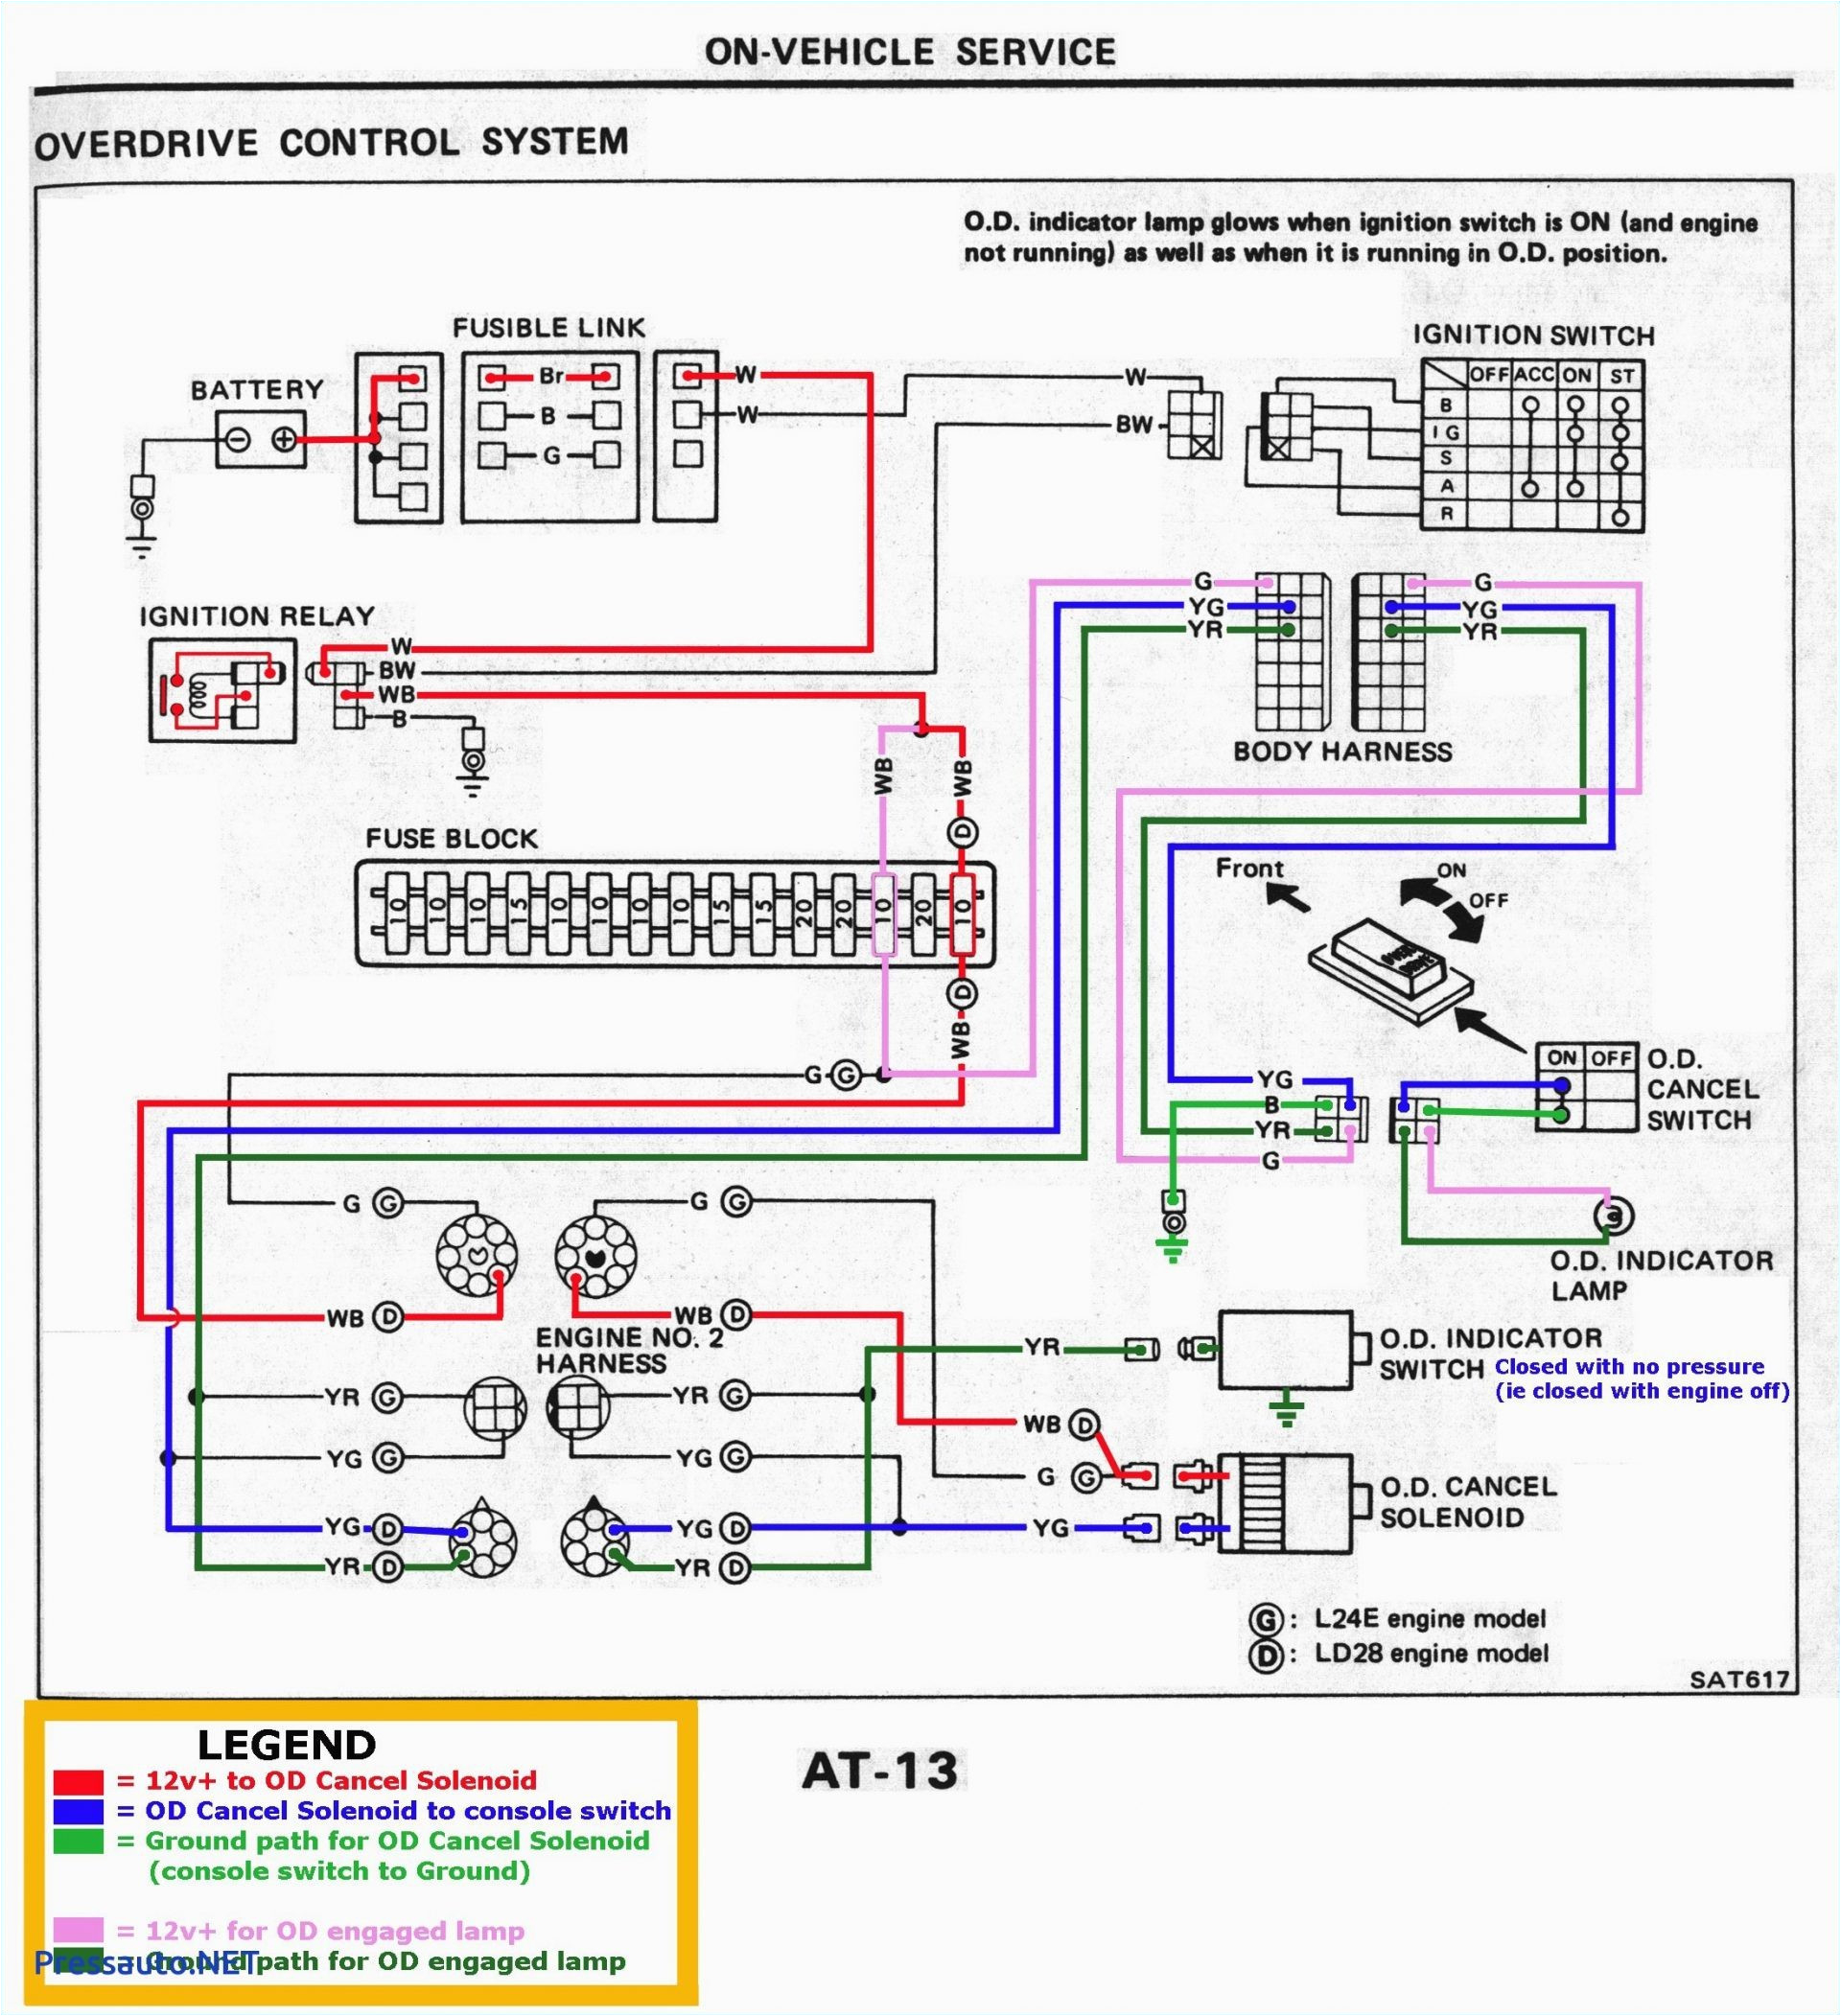 toyota wiring color codes blog wiring diagram toyota wiring color codes toyota wiring color codes